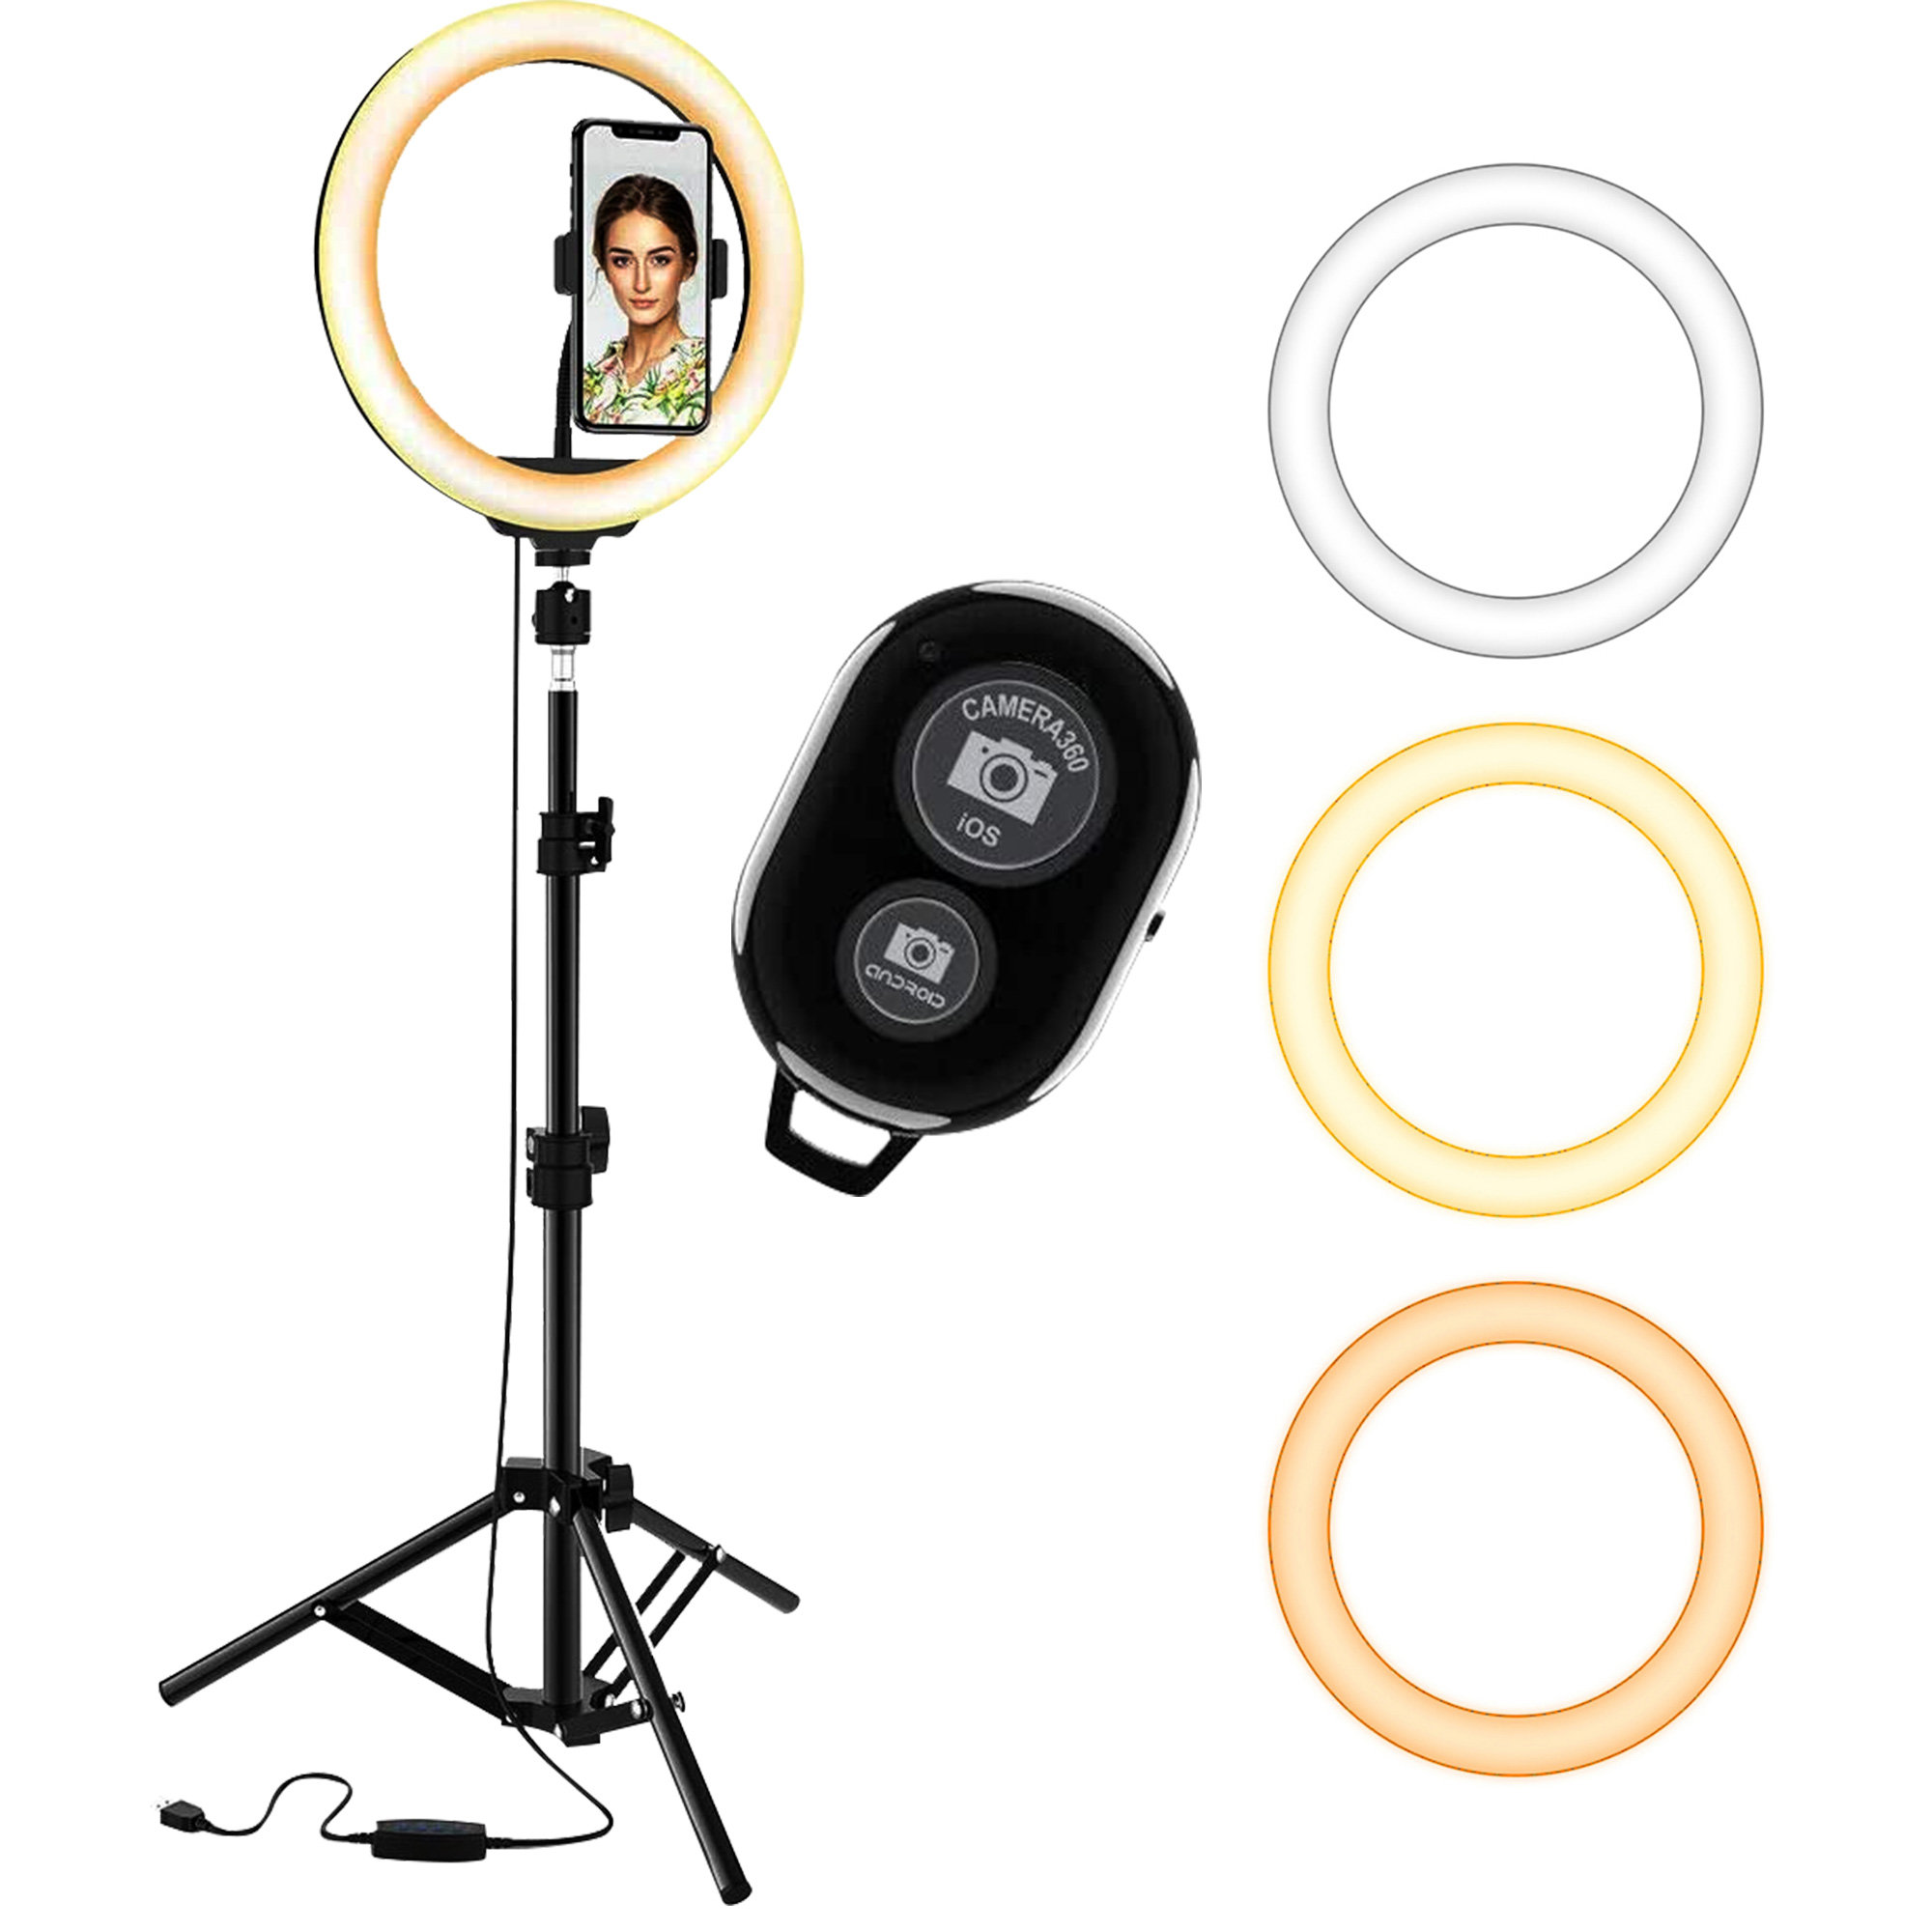 10 inch RGB Selfie Ring Light Colors Promise Dimming and Hose Phone Holder  at Rs 370/piece | Samaypur | New Delhi | ID: 22641612562